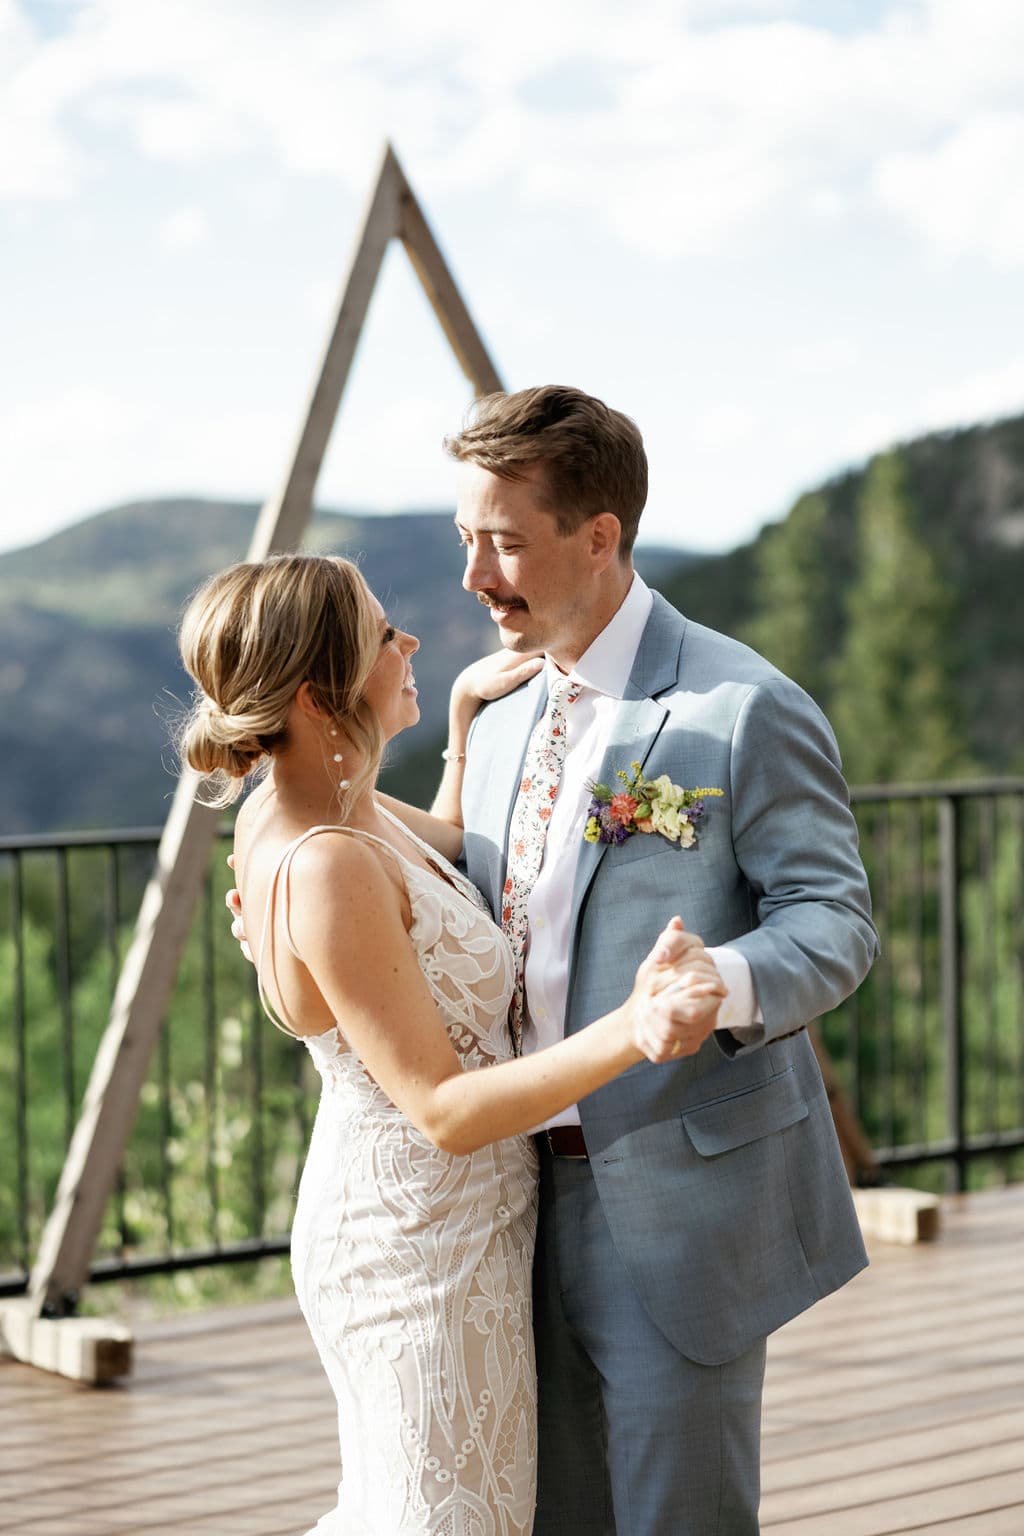 Couples first dance at their colorado mountain wedding on the deck at North Star Gatherings 